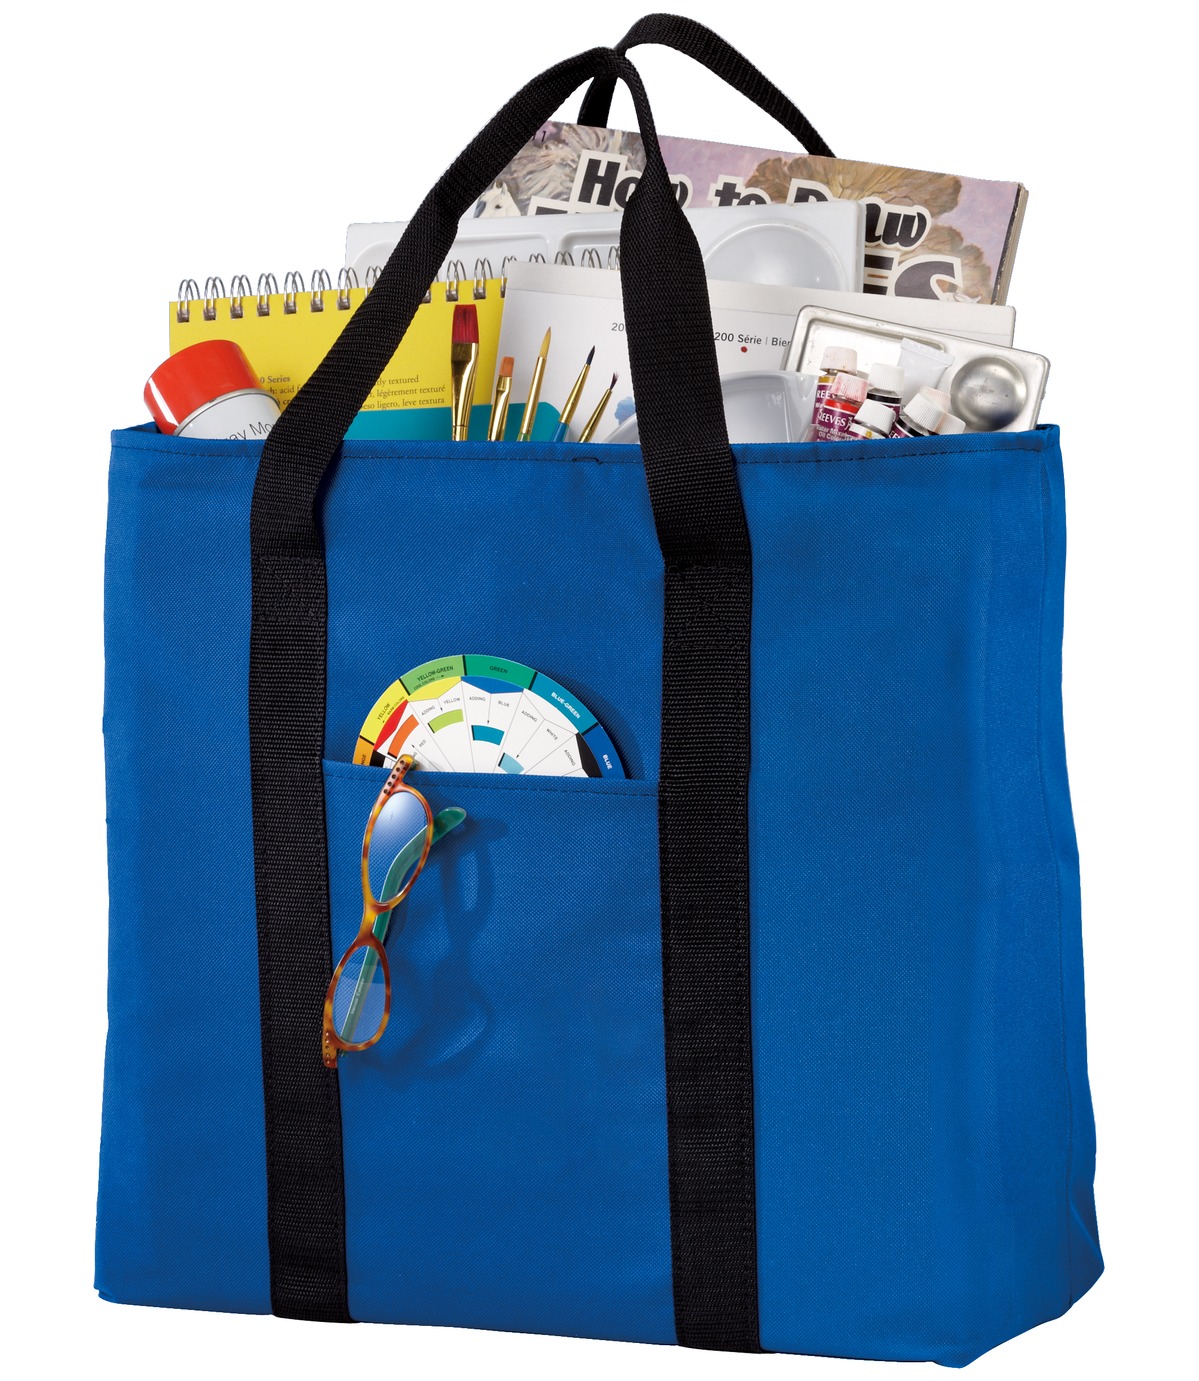 Port Authority All-Purpose Tote. B5000